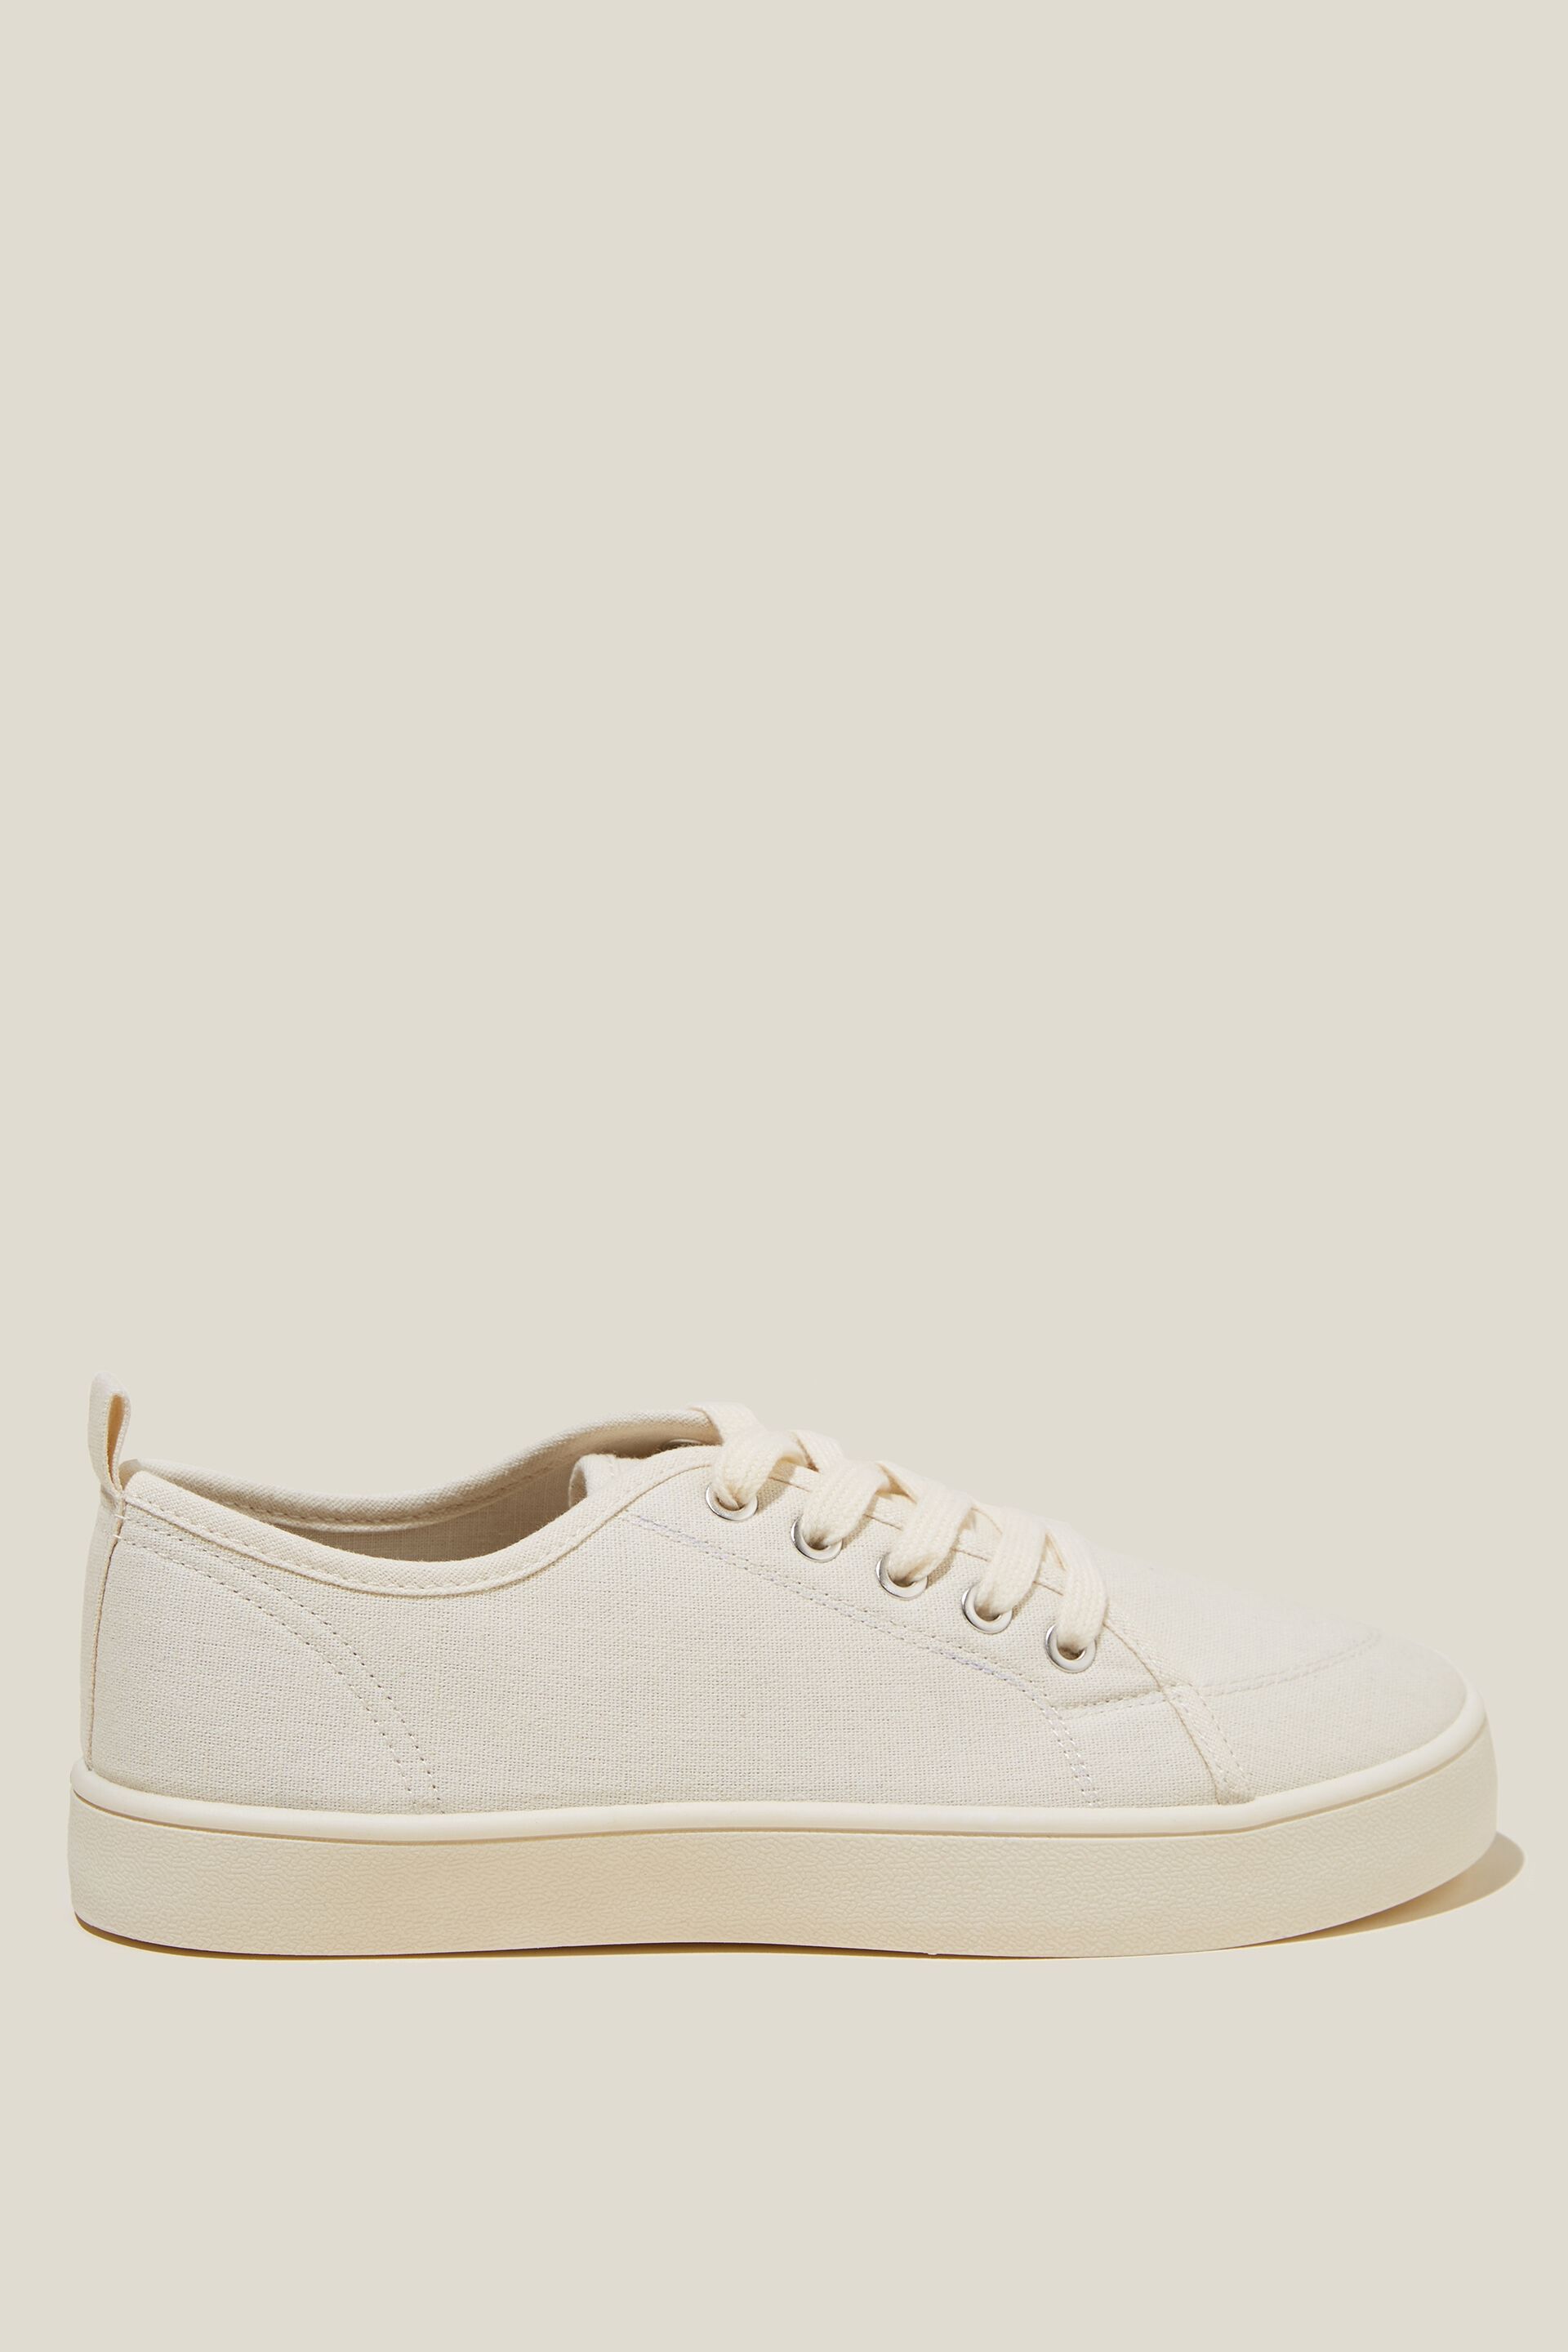 Rubi Shoes by Cotton On WILLOW PLATFORM - Trainers - bright white/white -  Zalando.ie